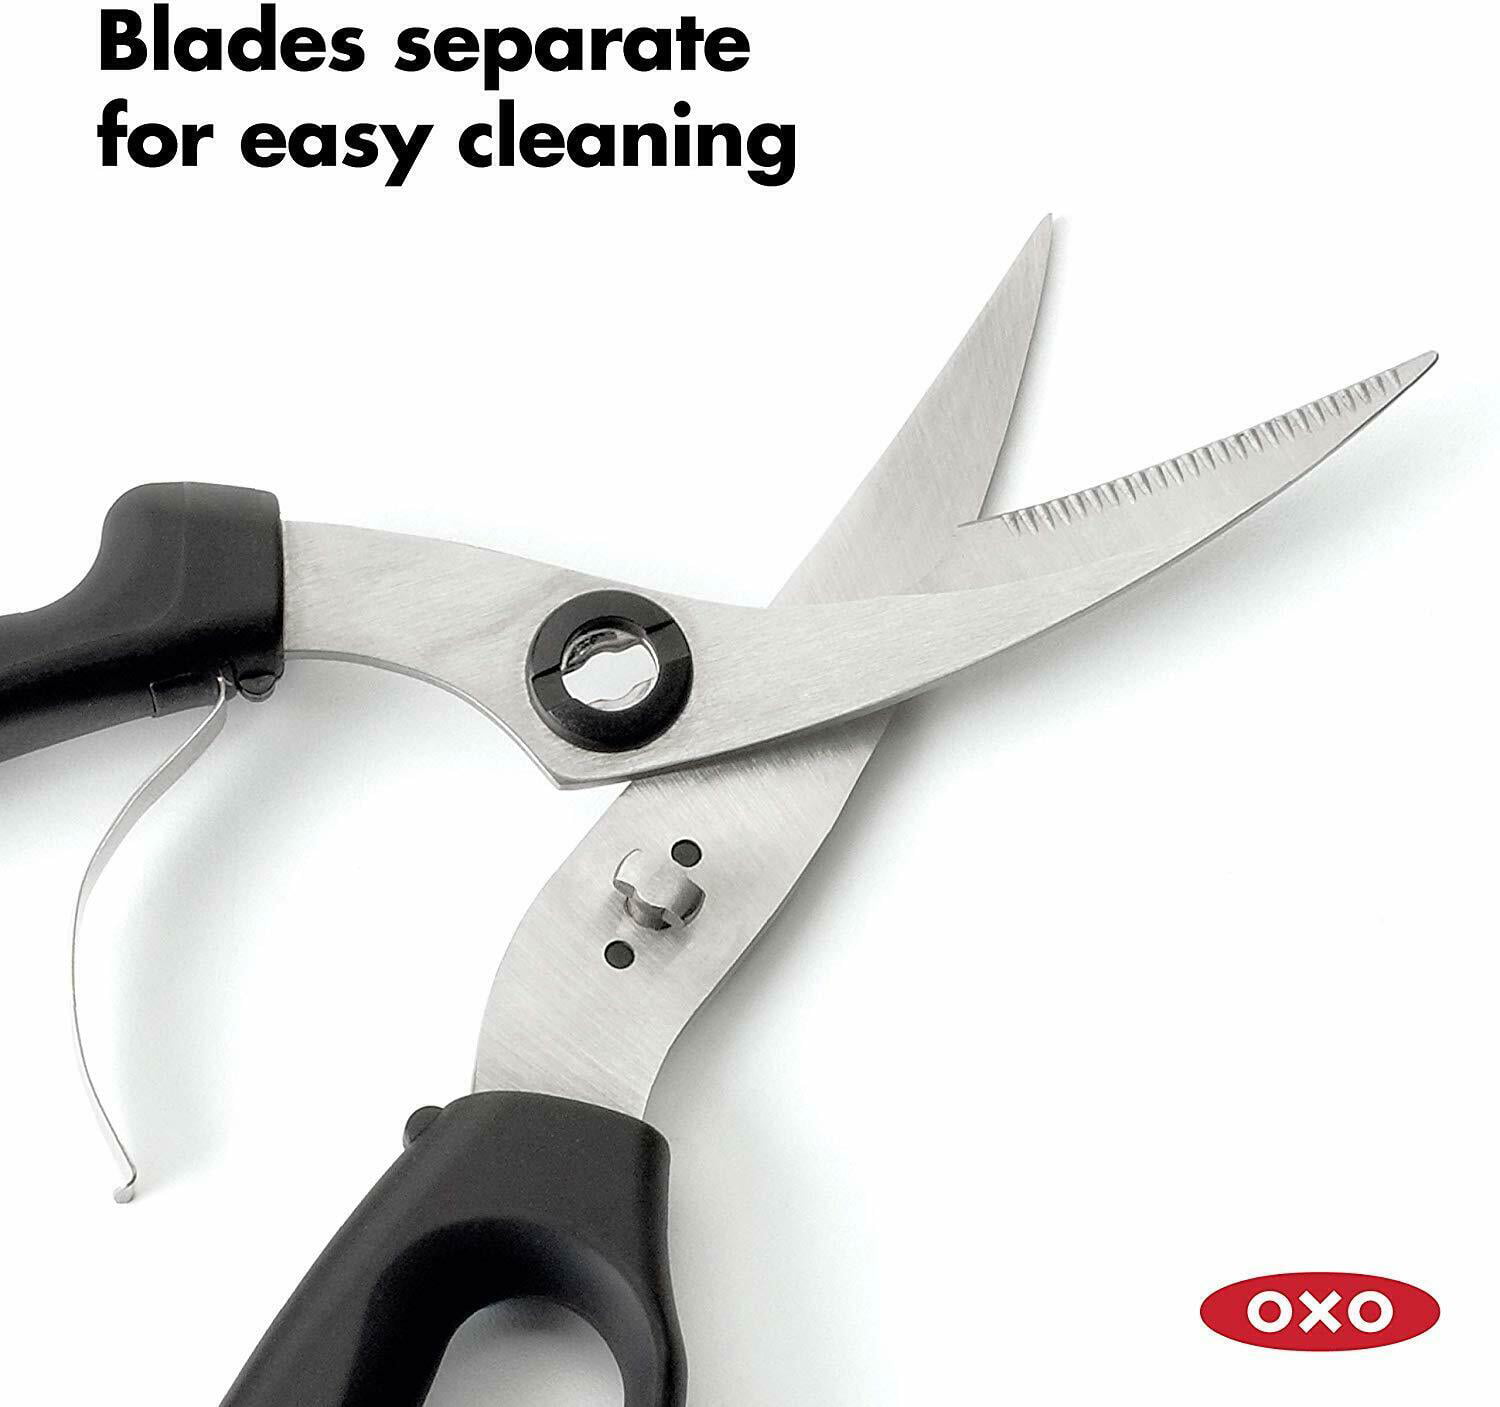 OXO 1072292 Good Grips Pro Stainless Steel Kitchen Poultry Shears for sale online 